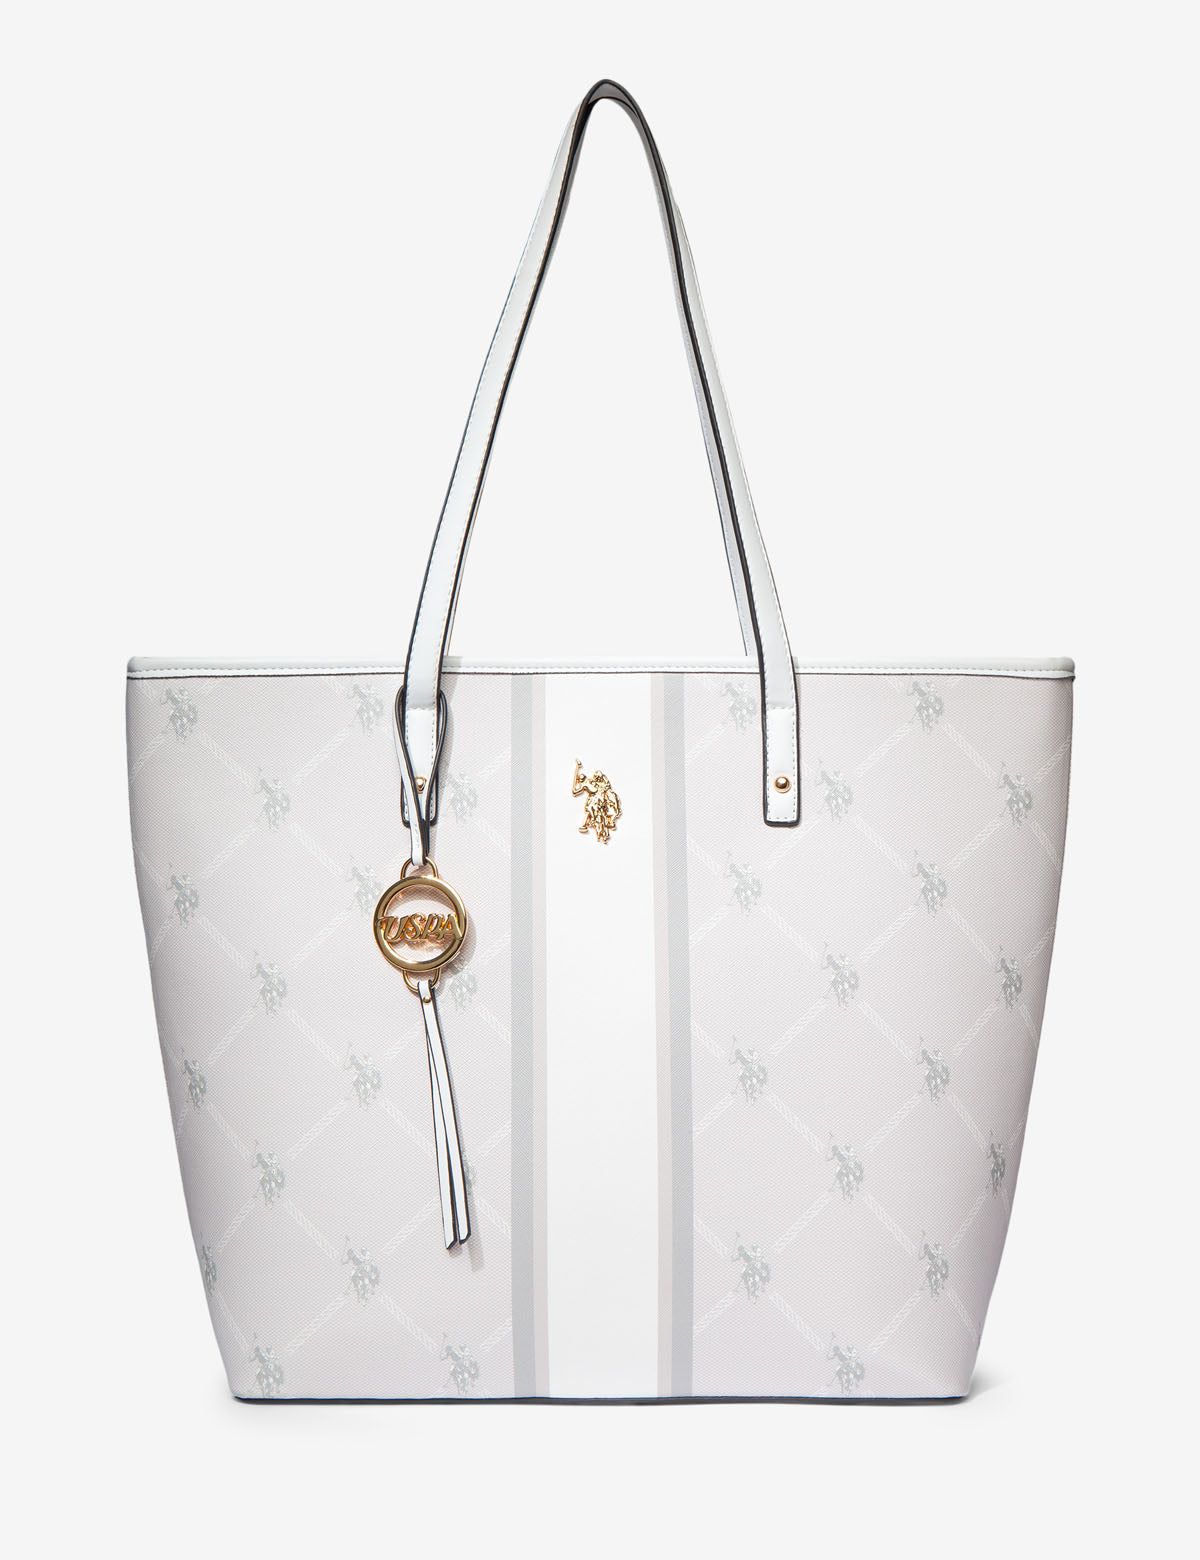 silver beach bag with zip